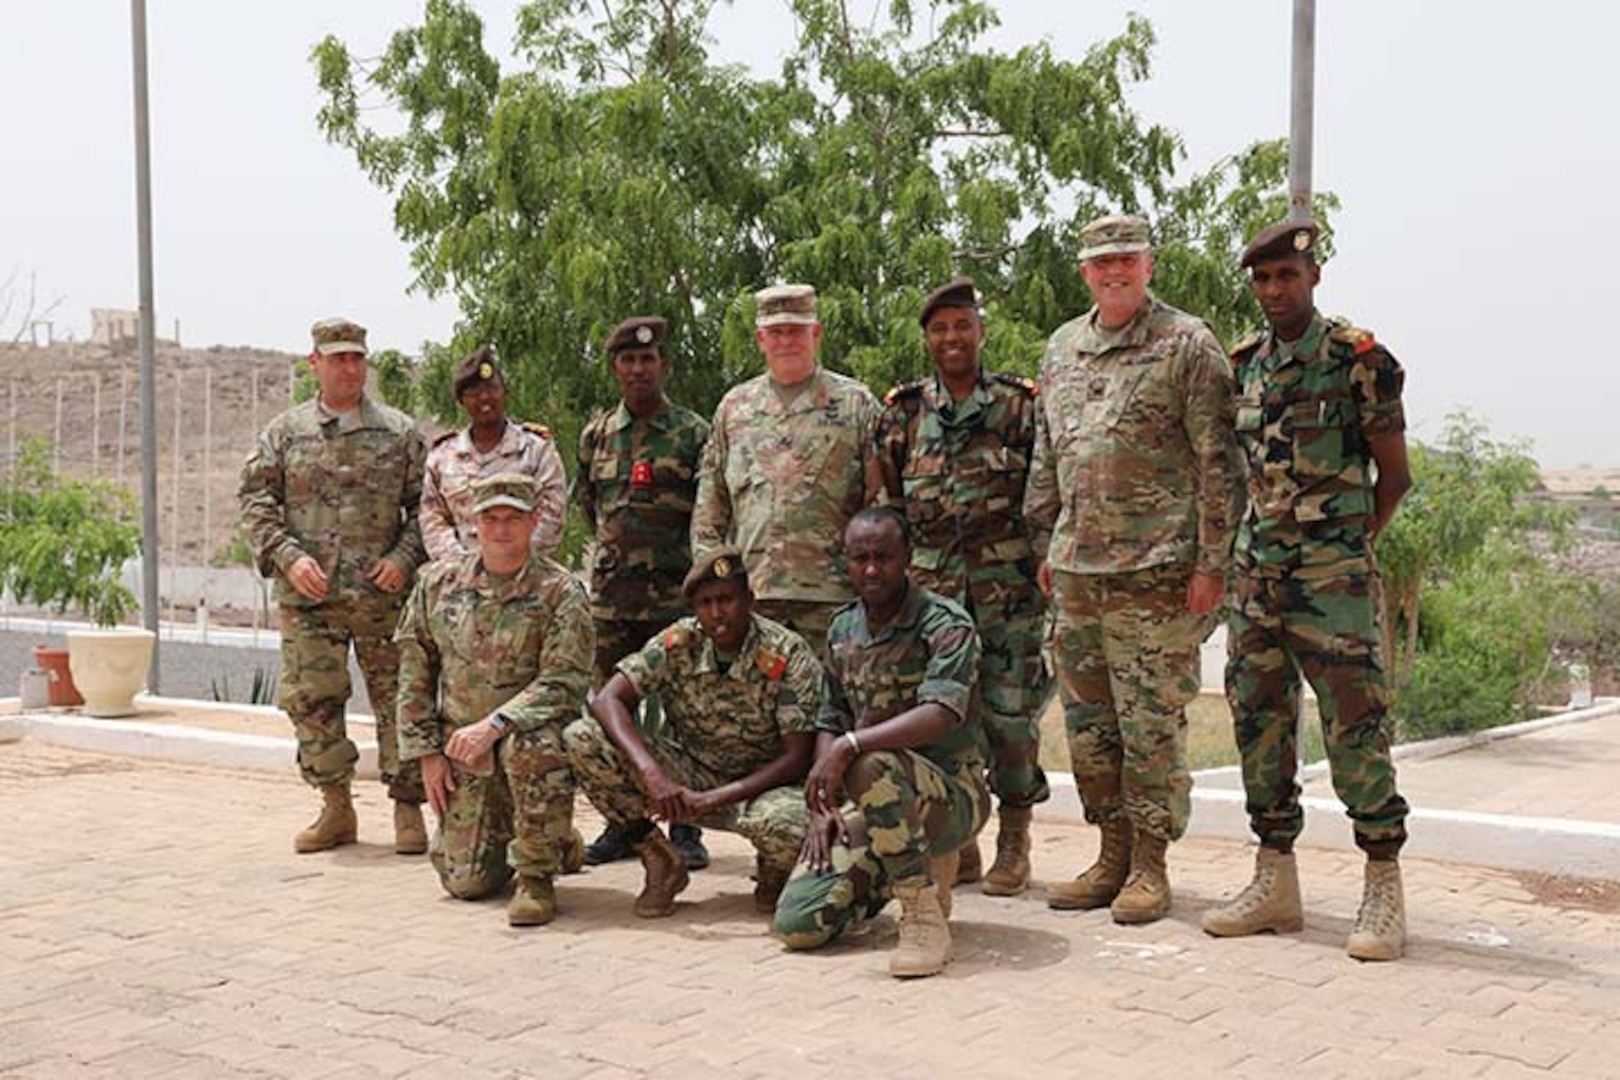 Representatives from the Kentucky National Guard met with their military counterparts from Djibouti June 23, 2018, in Djibouti, Africa. Kentucky is partnered with Djibouti as part of the State Partnership Program.